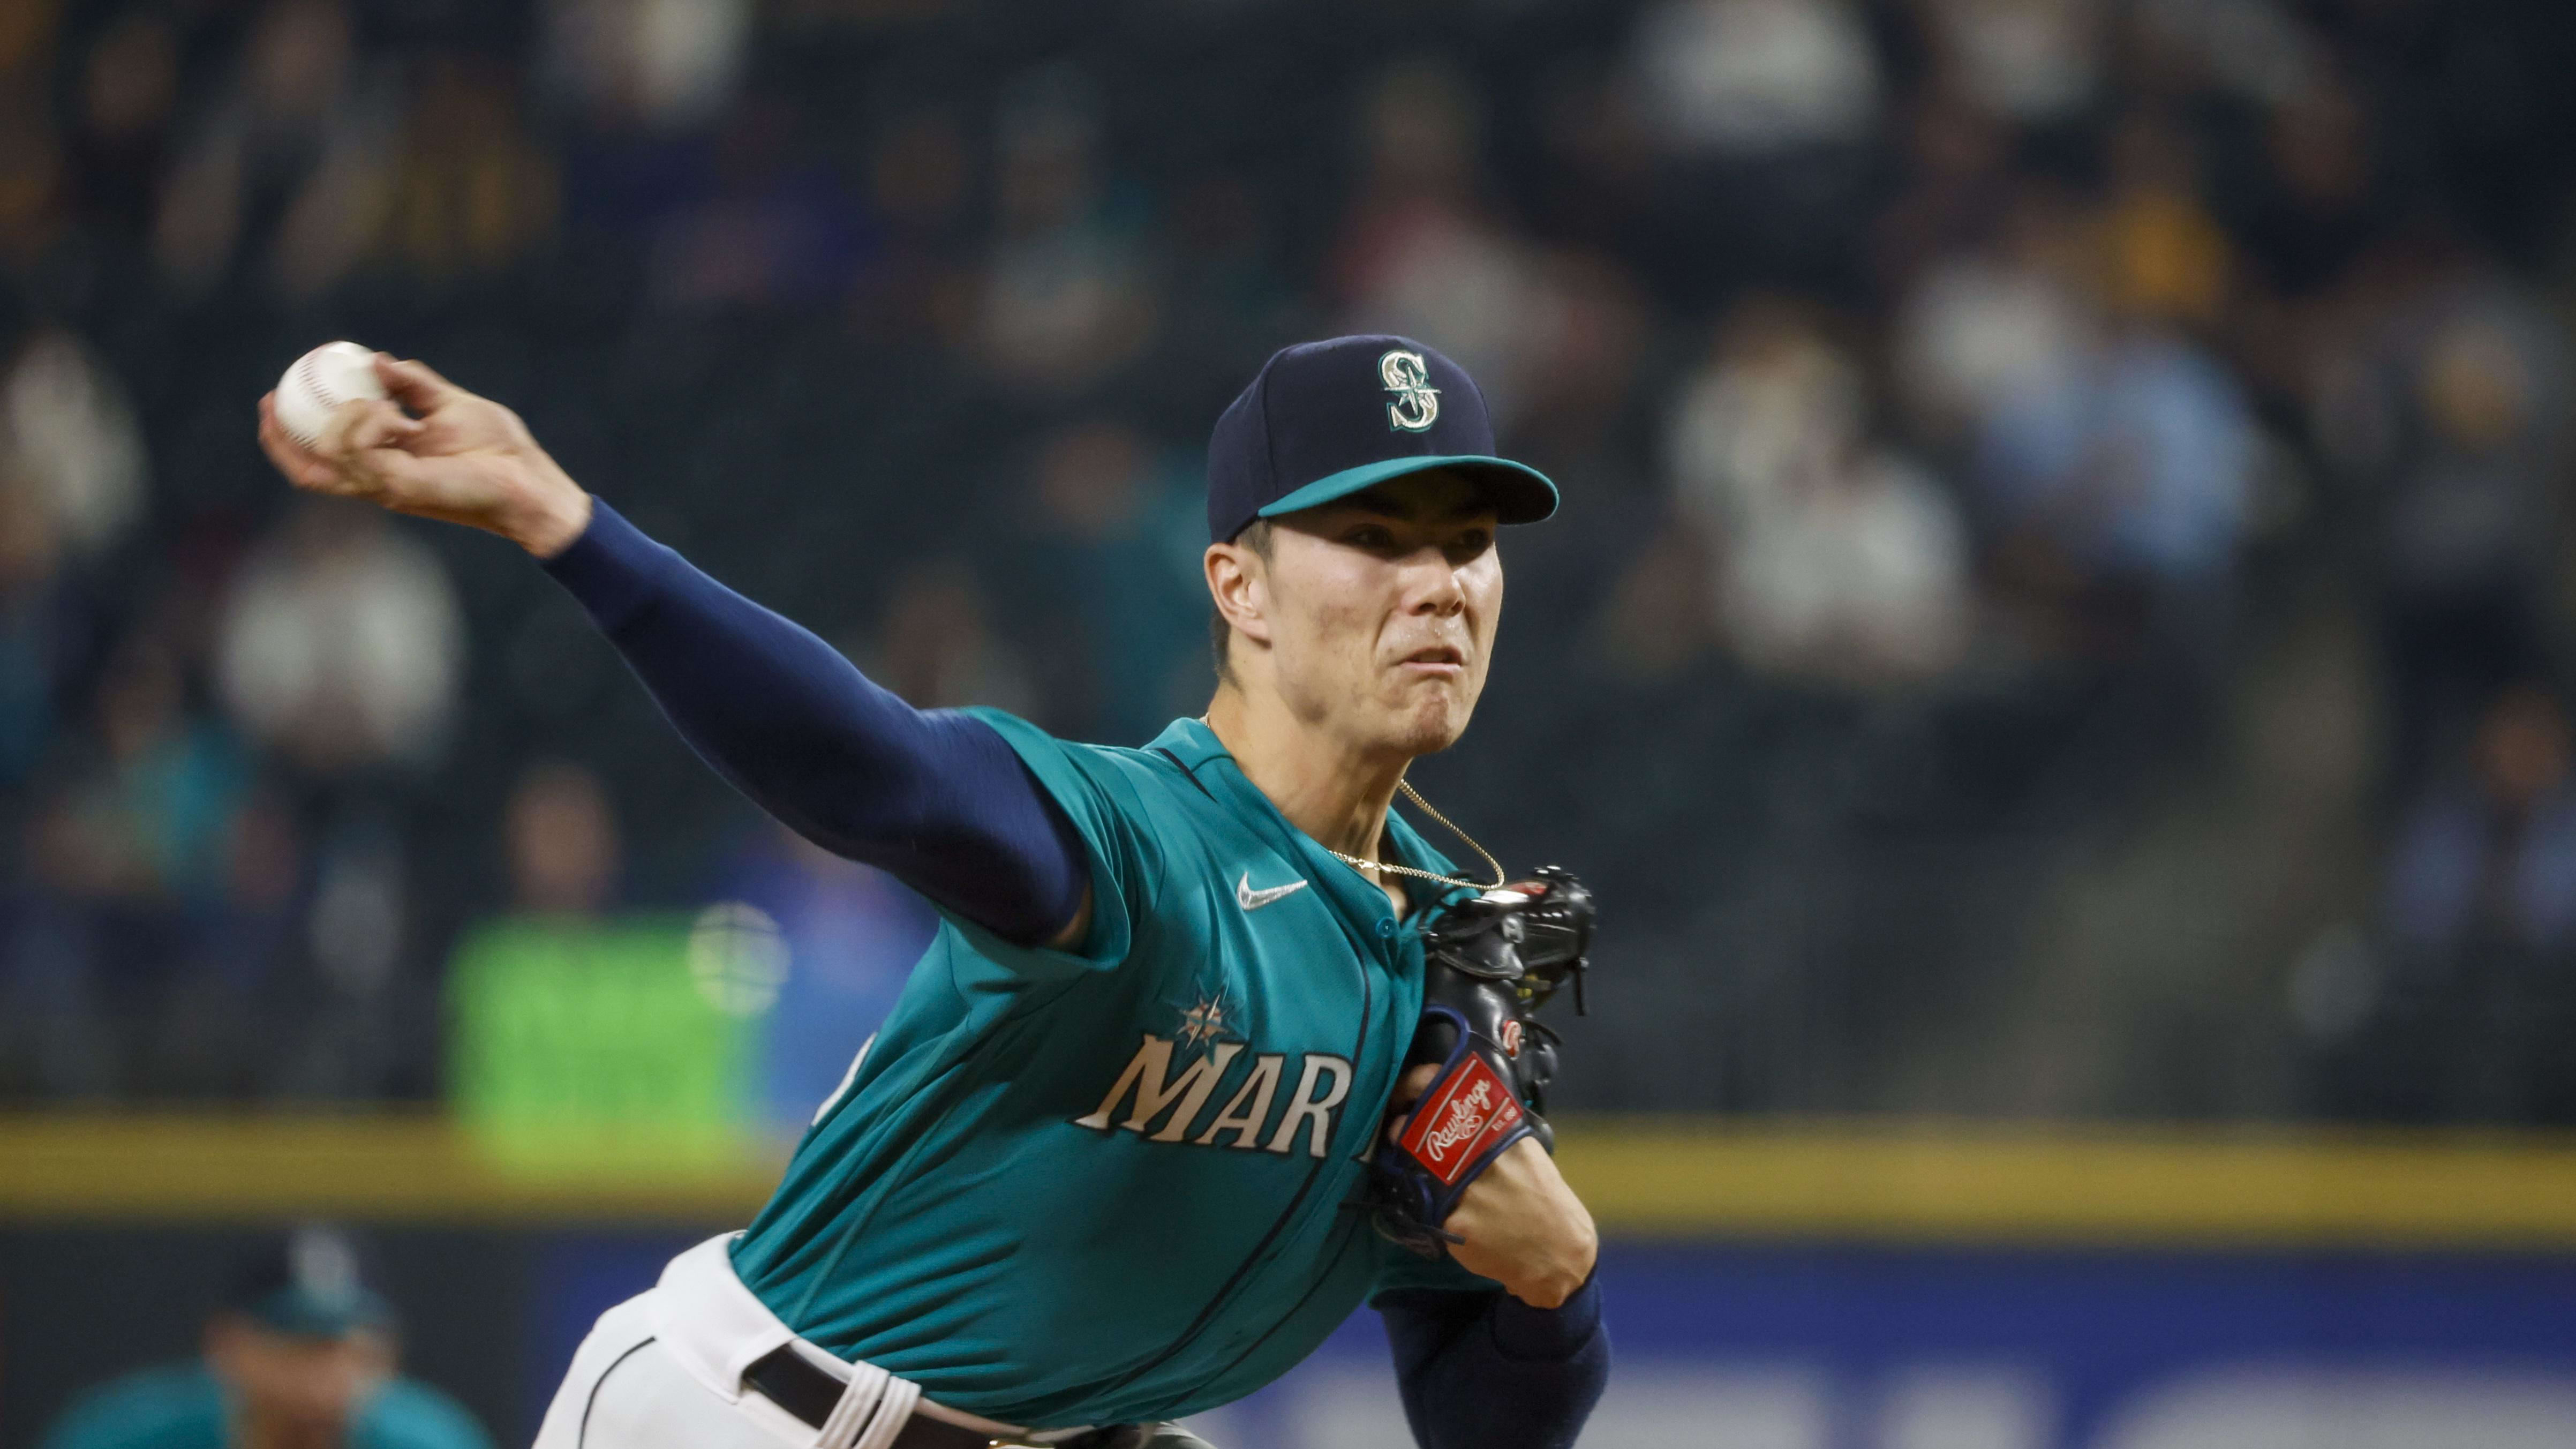 Seattle Mariners’ Righty Could Be Nearing Return From Injury